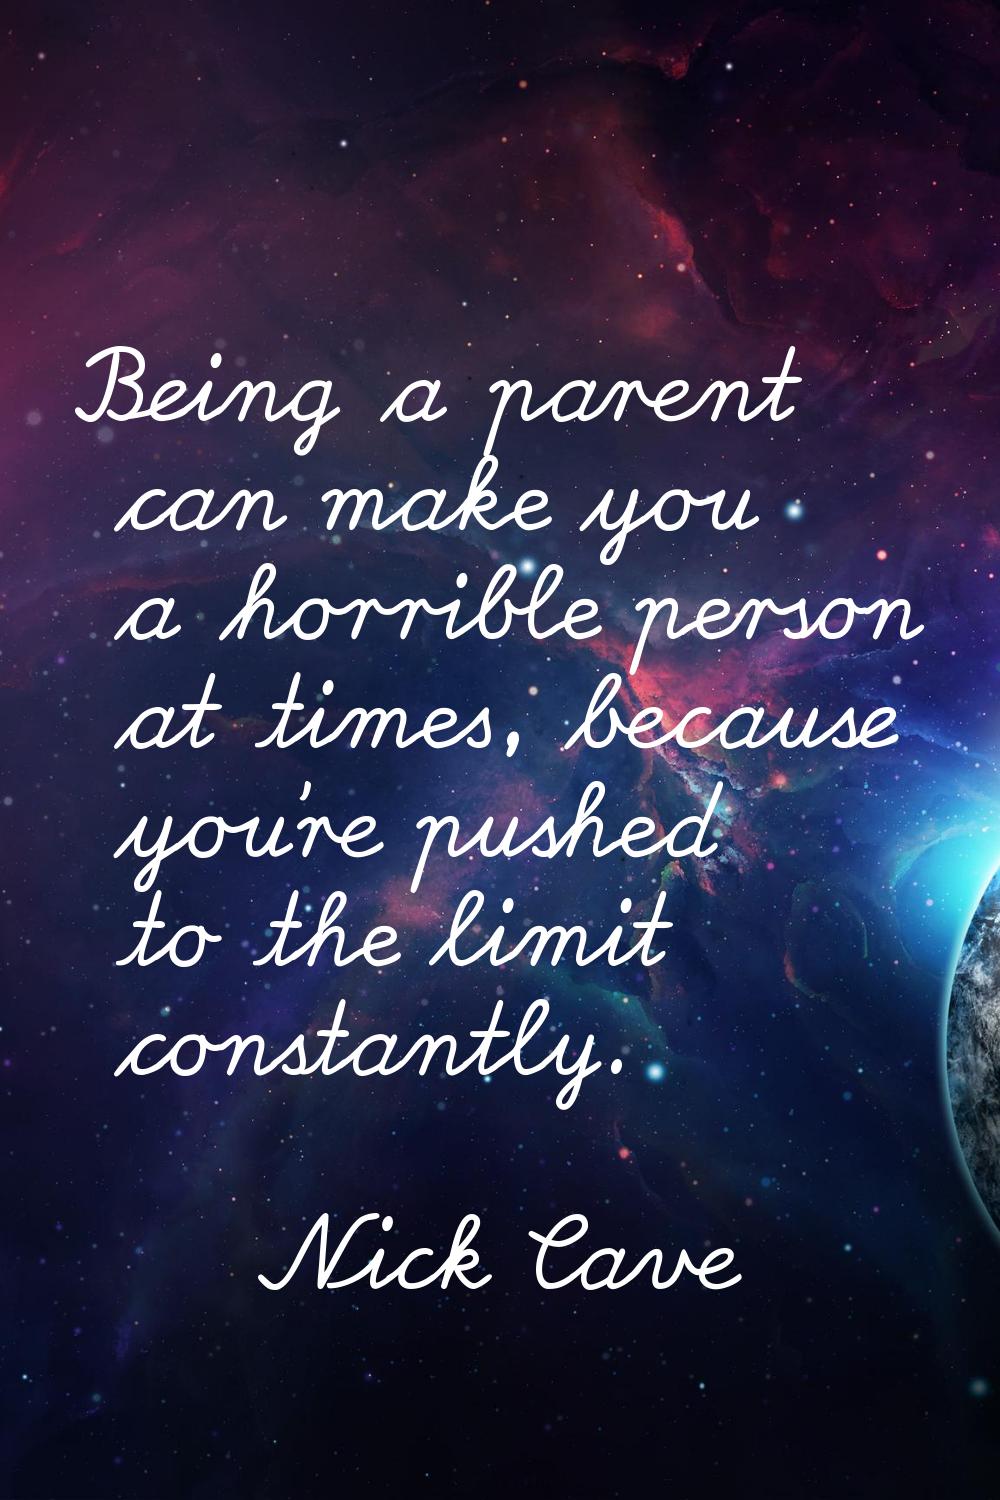 Being a parent can make you a horrible person at times, because you're pushed to the limit constant